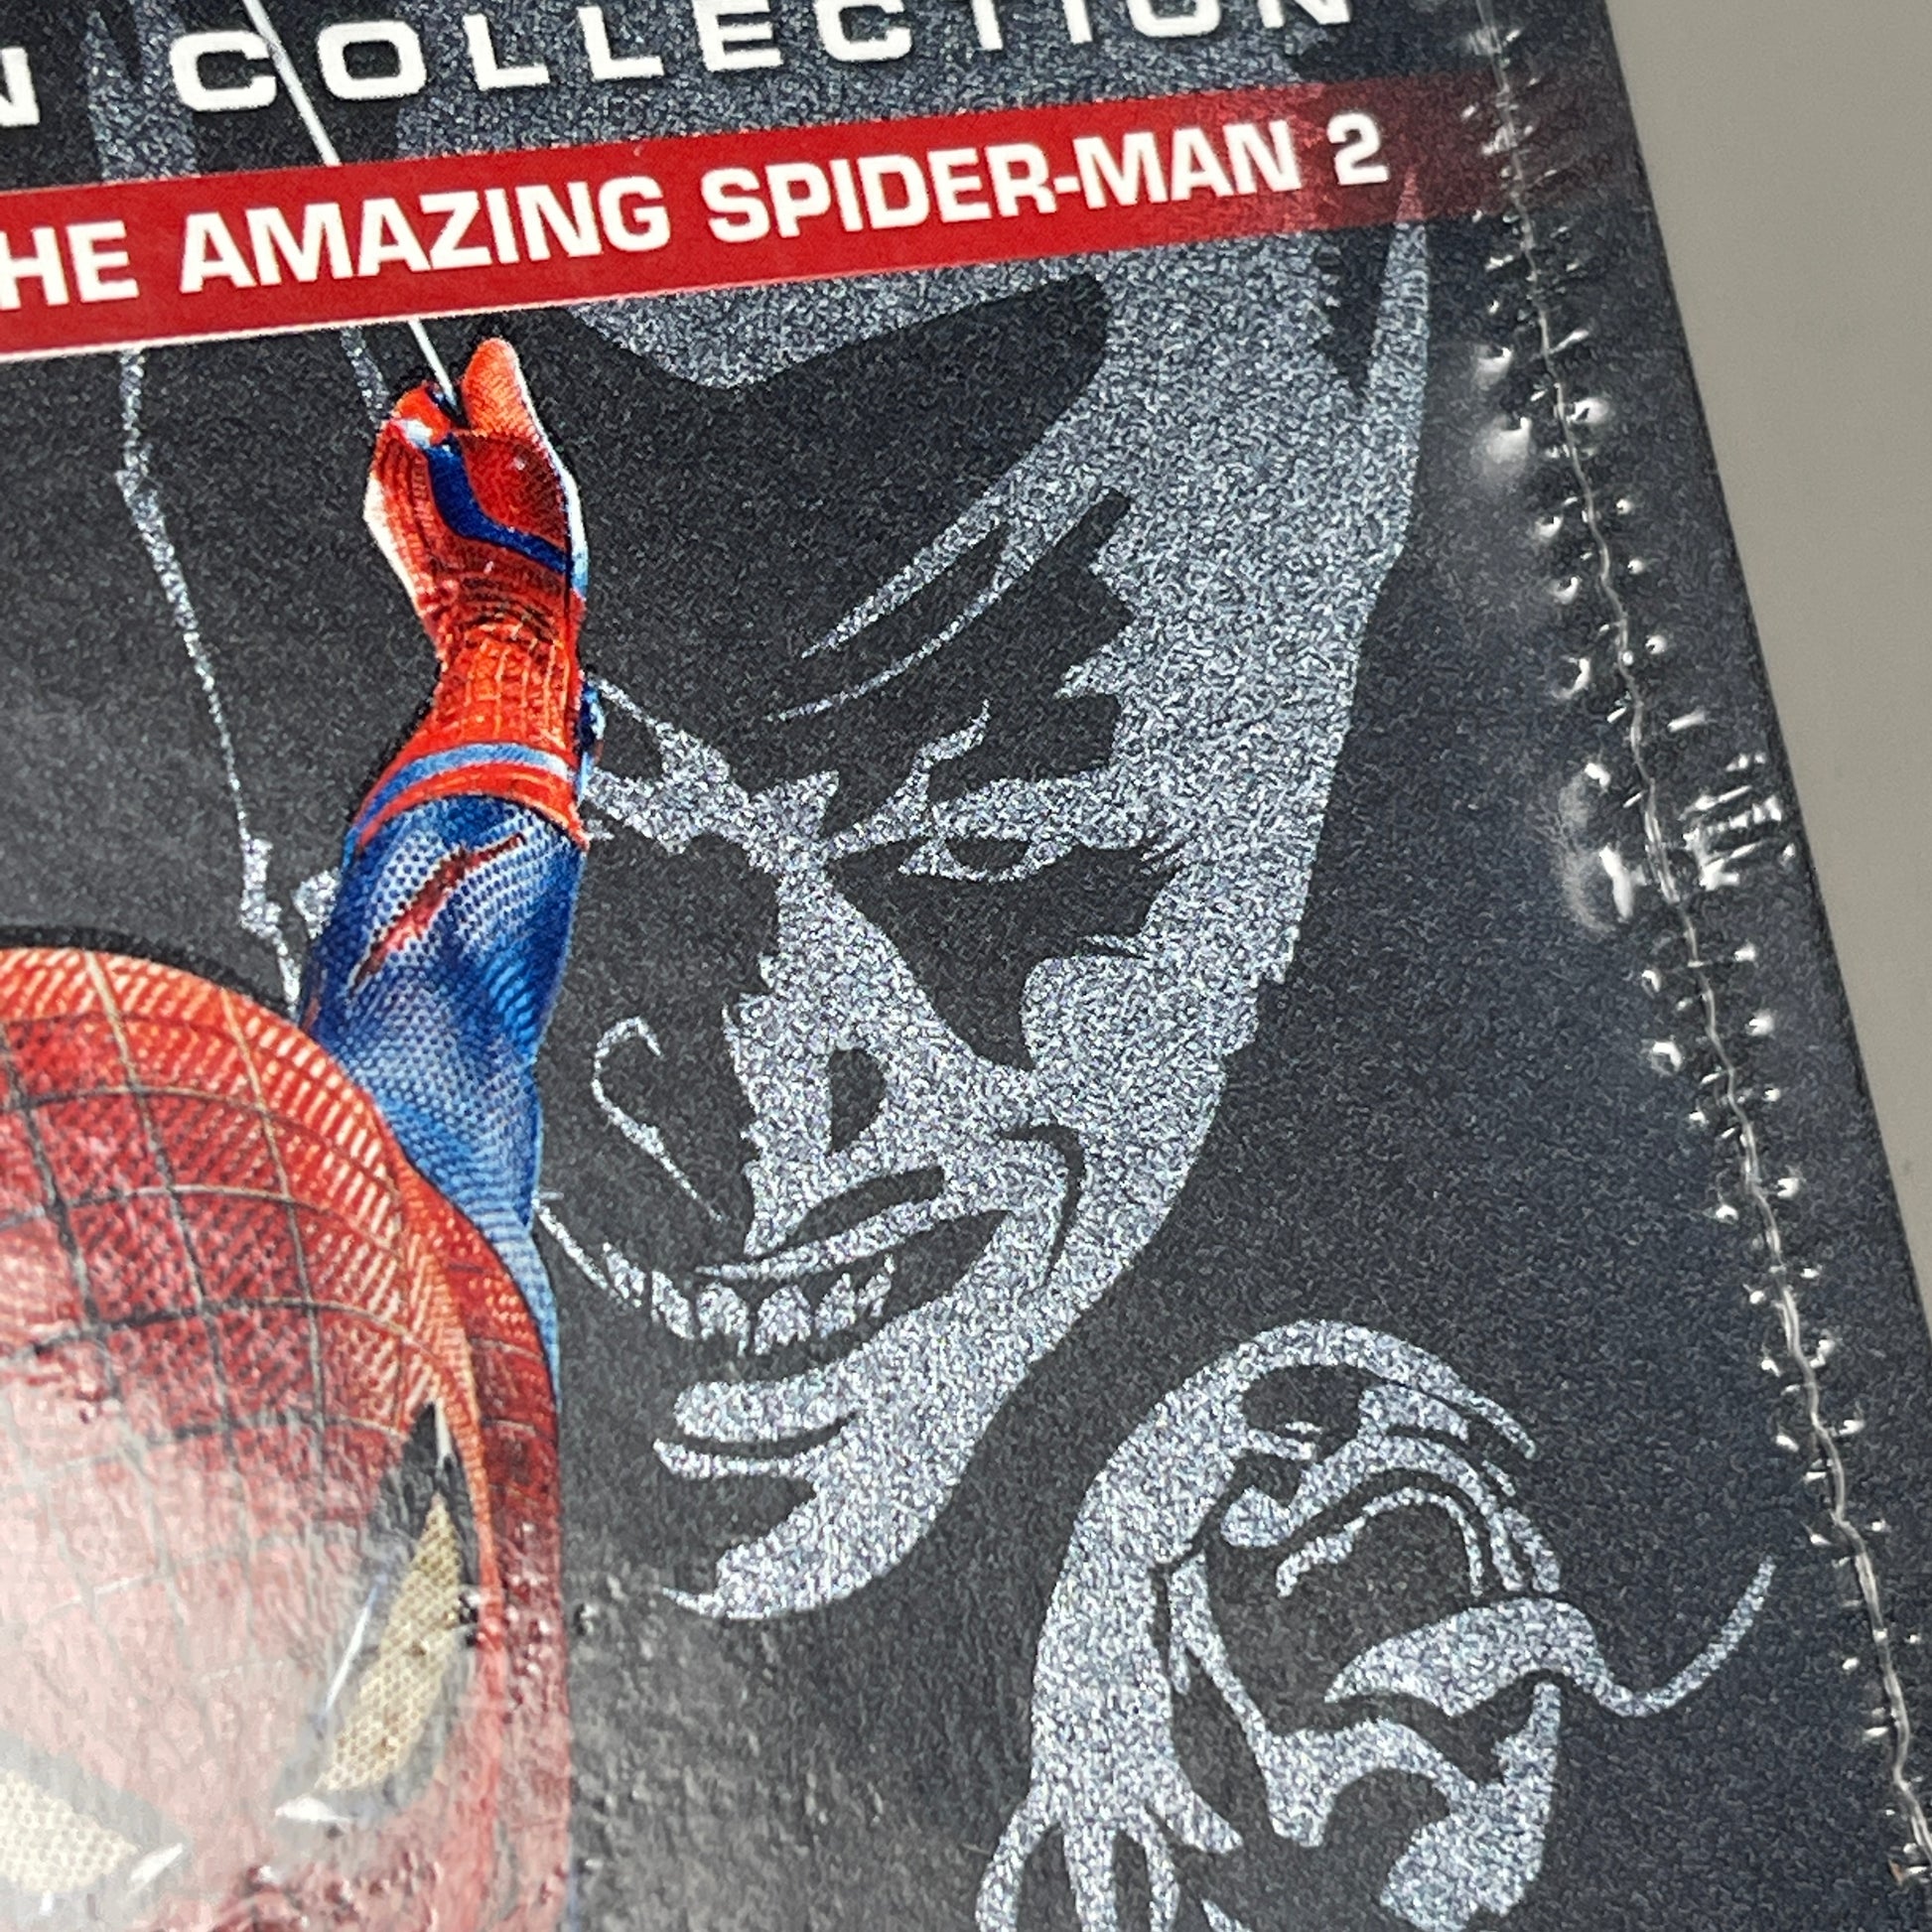 THE AMAZING SPIDER-MAN 1 & 2 Two-Movie BLU-RAY Limited Edition Marvel (New)